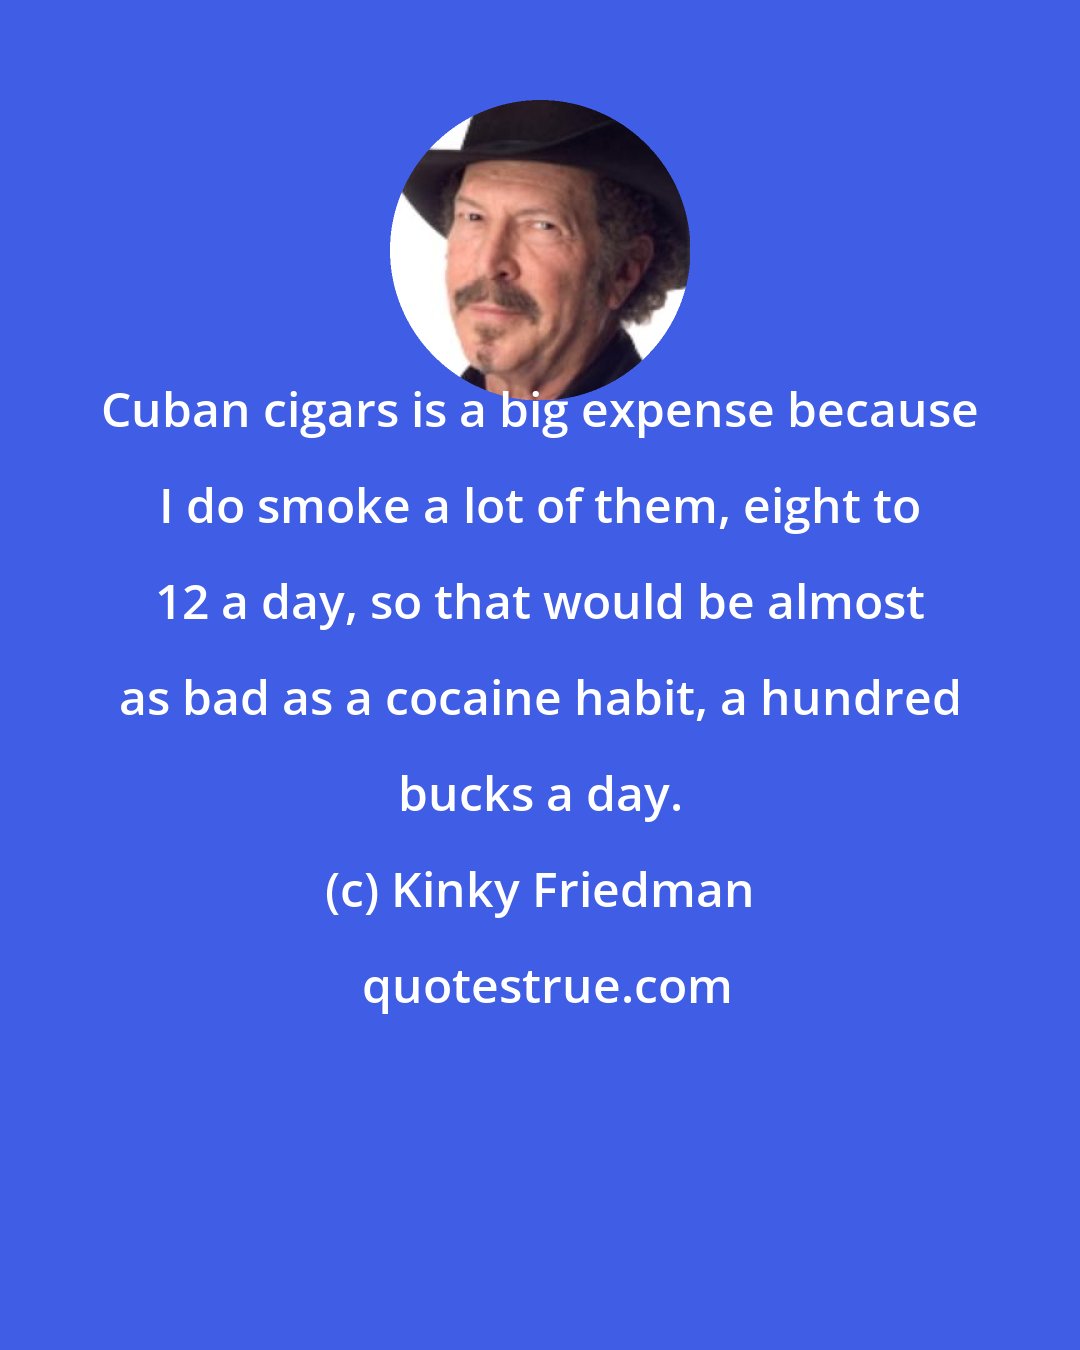 Kinky Friedman: Cuban cigars is a big expense because I do smoke a lot of them, eight to 12 a day, so that would be almost as bad as a cocaine habit, a hundred bucks a day.